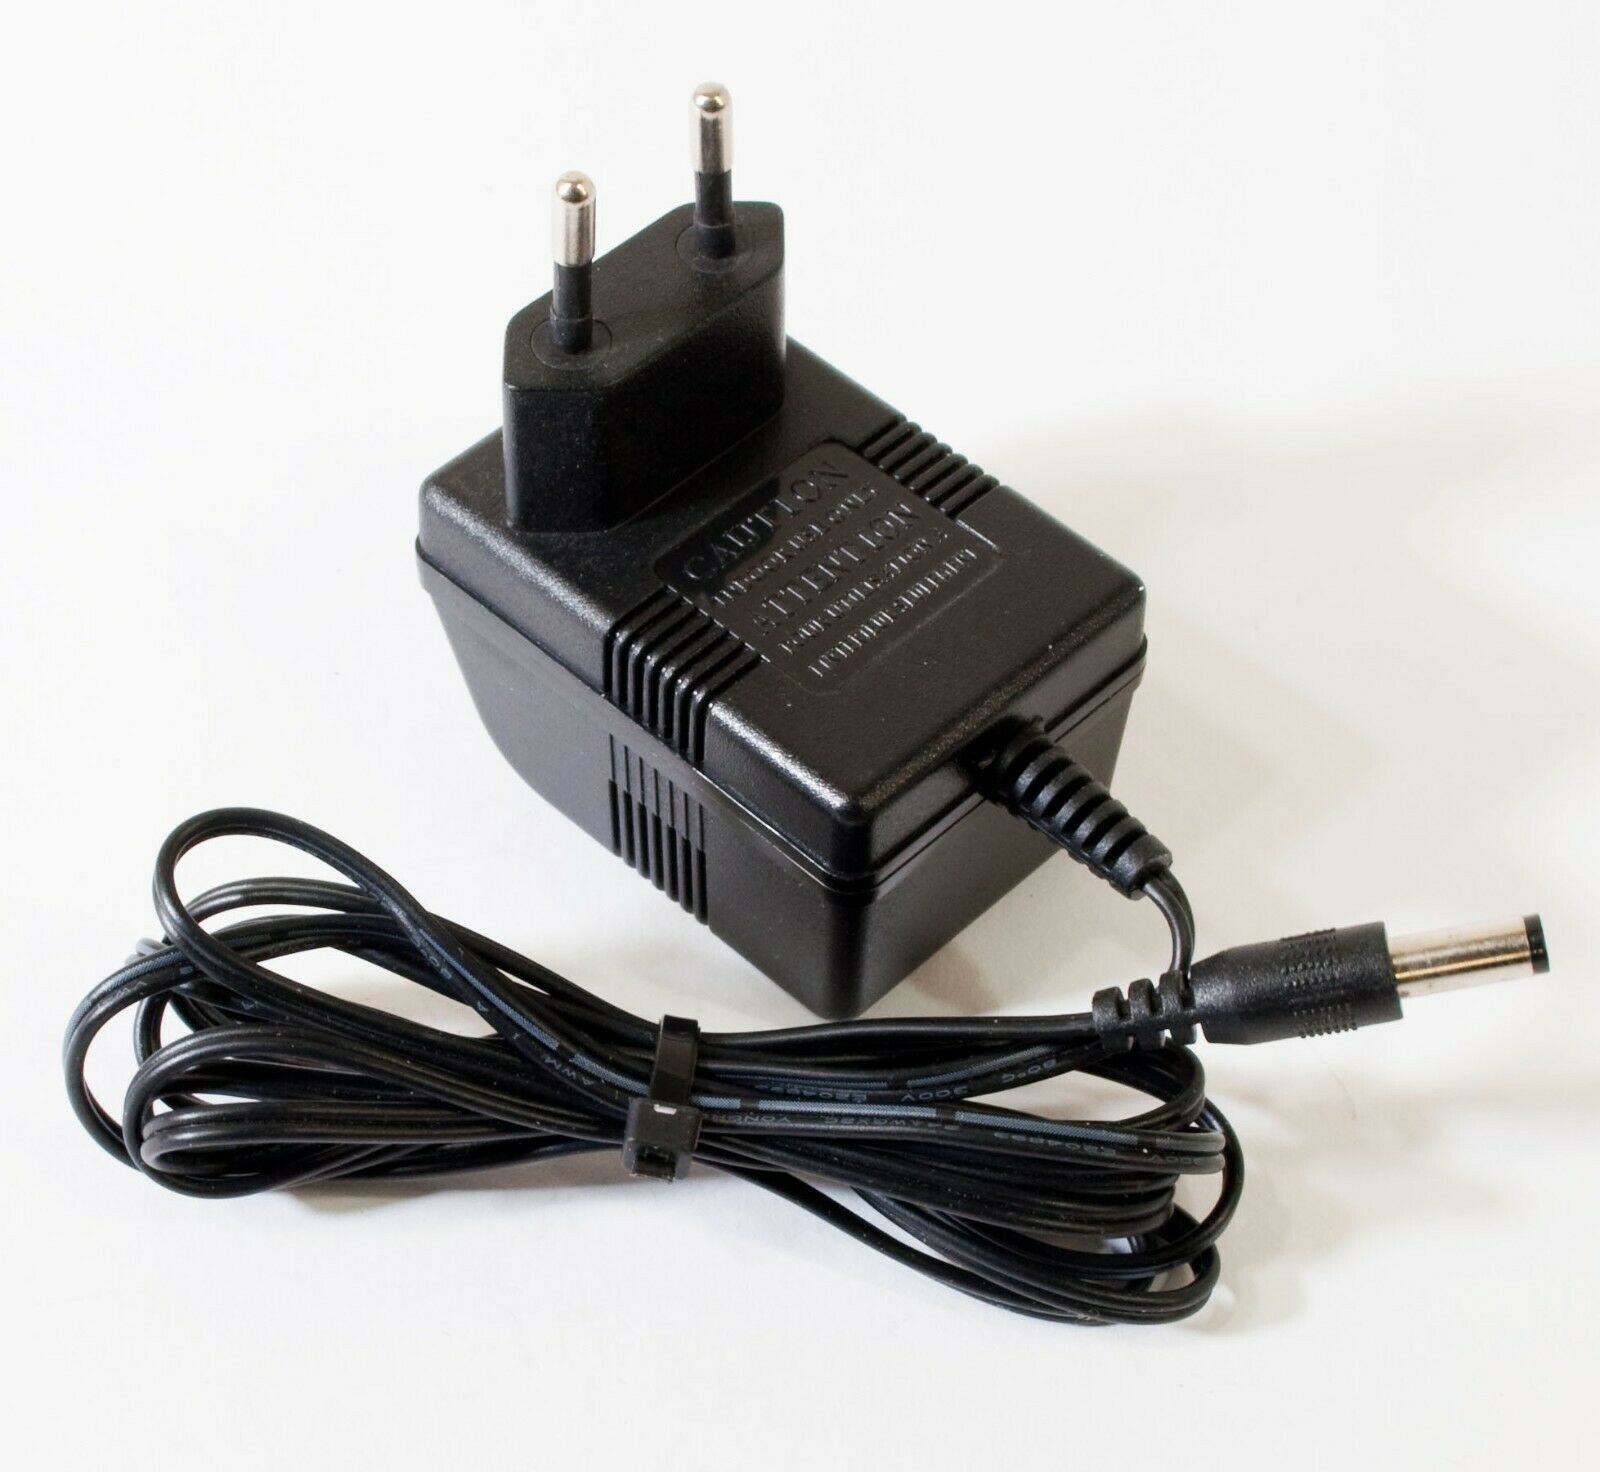 Yuyao FYB-A00700200 AC Adapter 7V 200mA Original Power Supply Output Current: 200 mA Compatible Brand: For Yuyao Unit